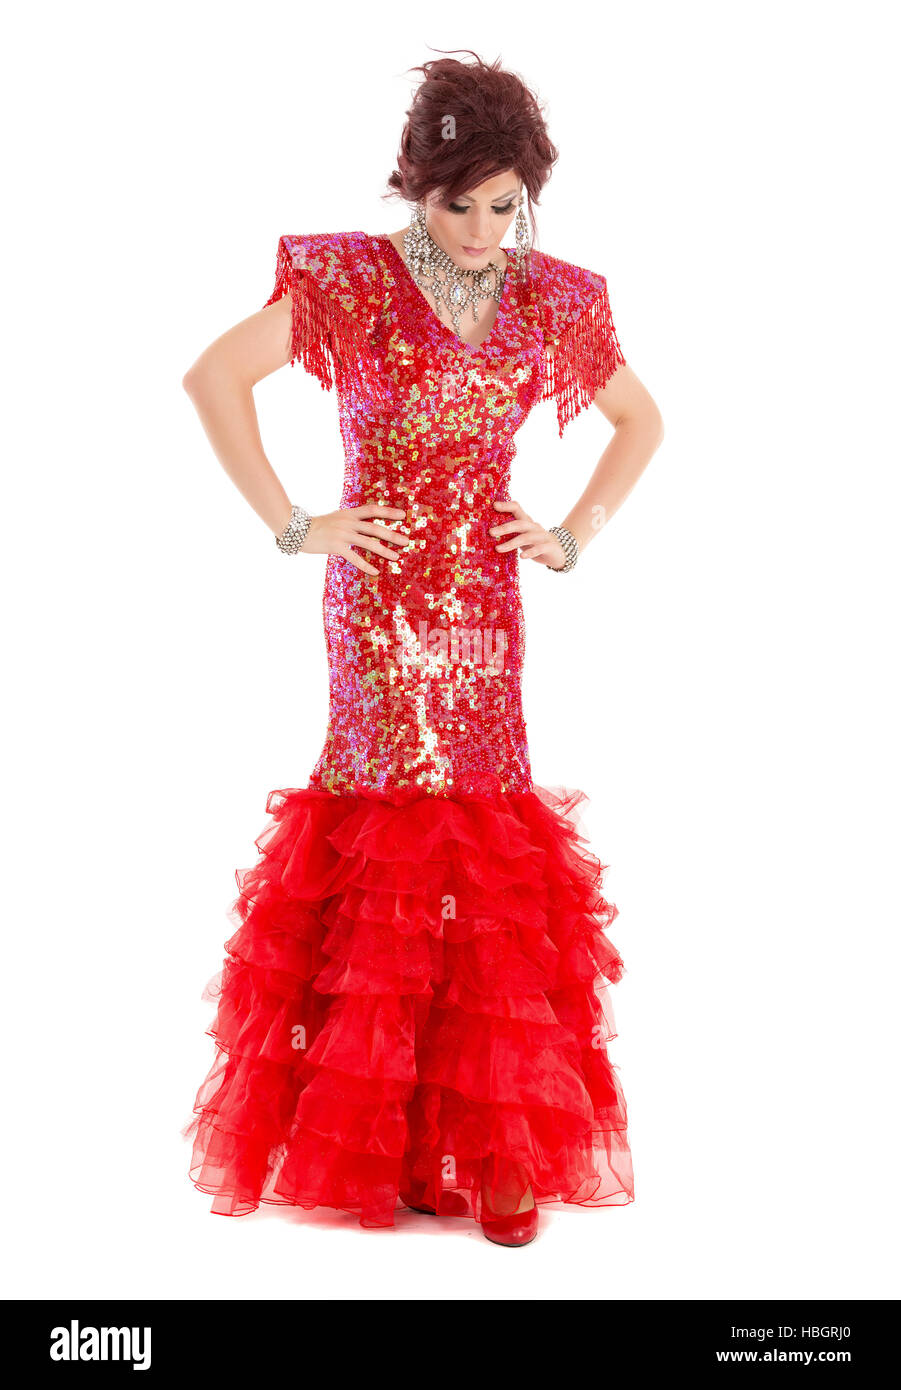 Portrait Drag Queen in Red Dress Performing Stock Photo